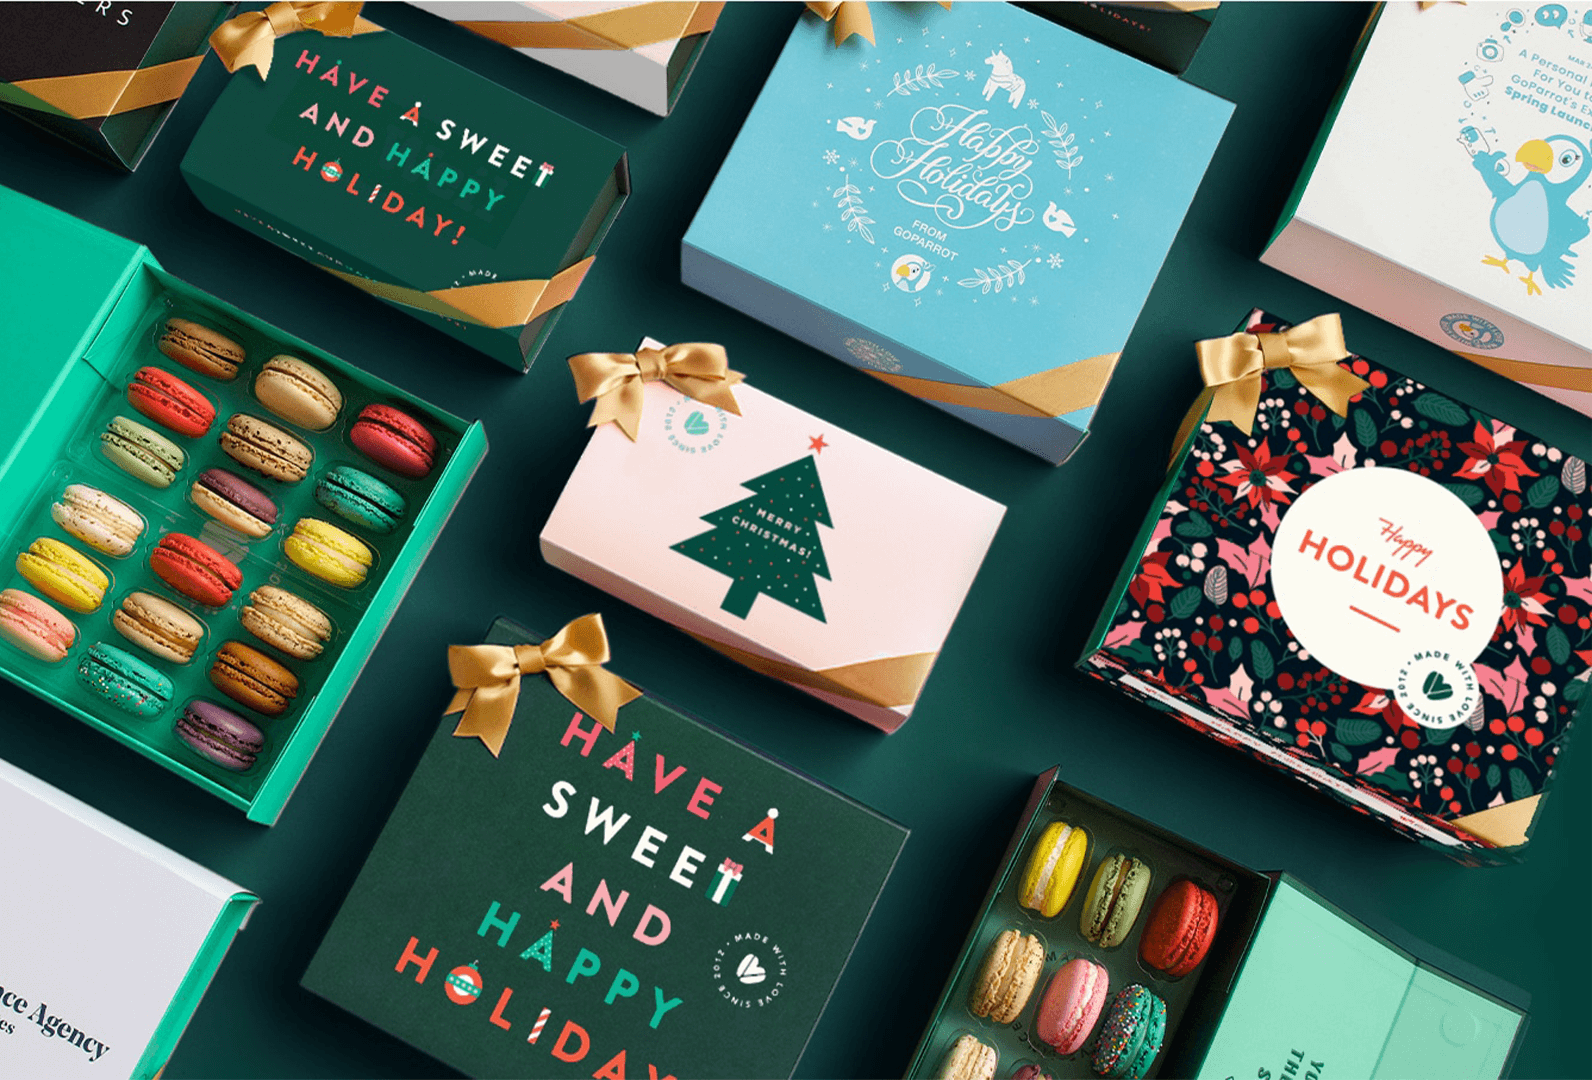 A box full of assorted French macarons has a French macaron box with a customized holiday sleeve and a customized greeting card to its left